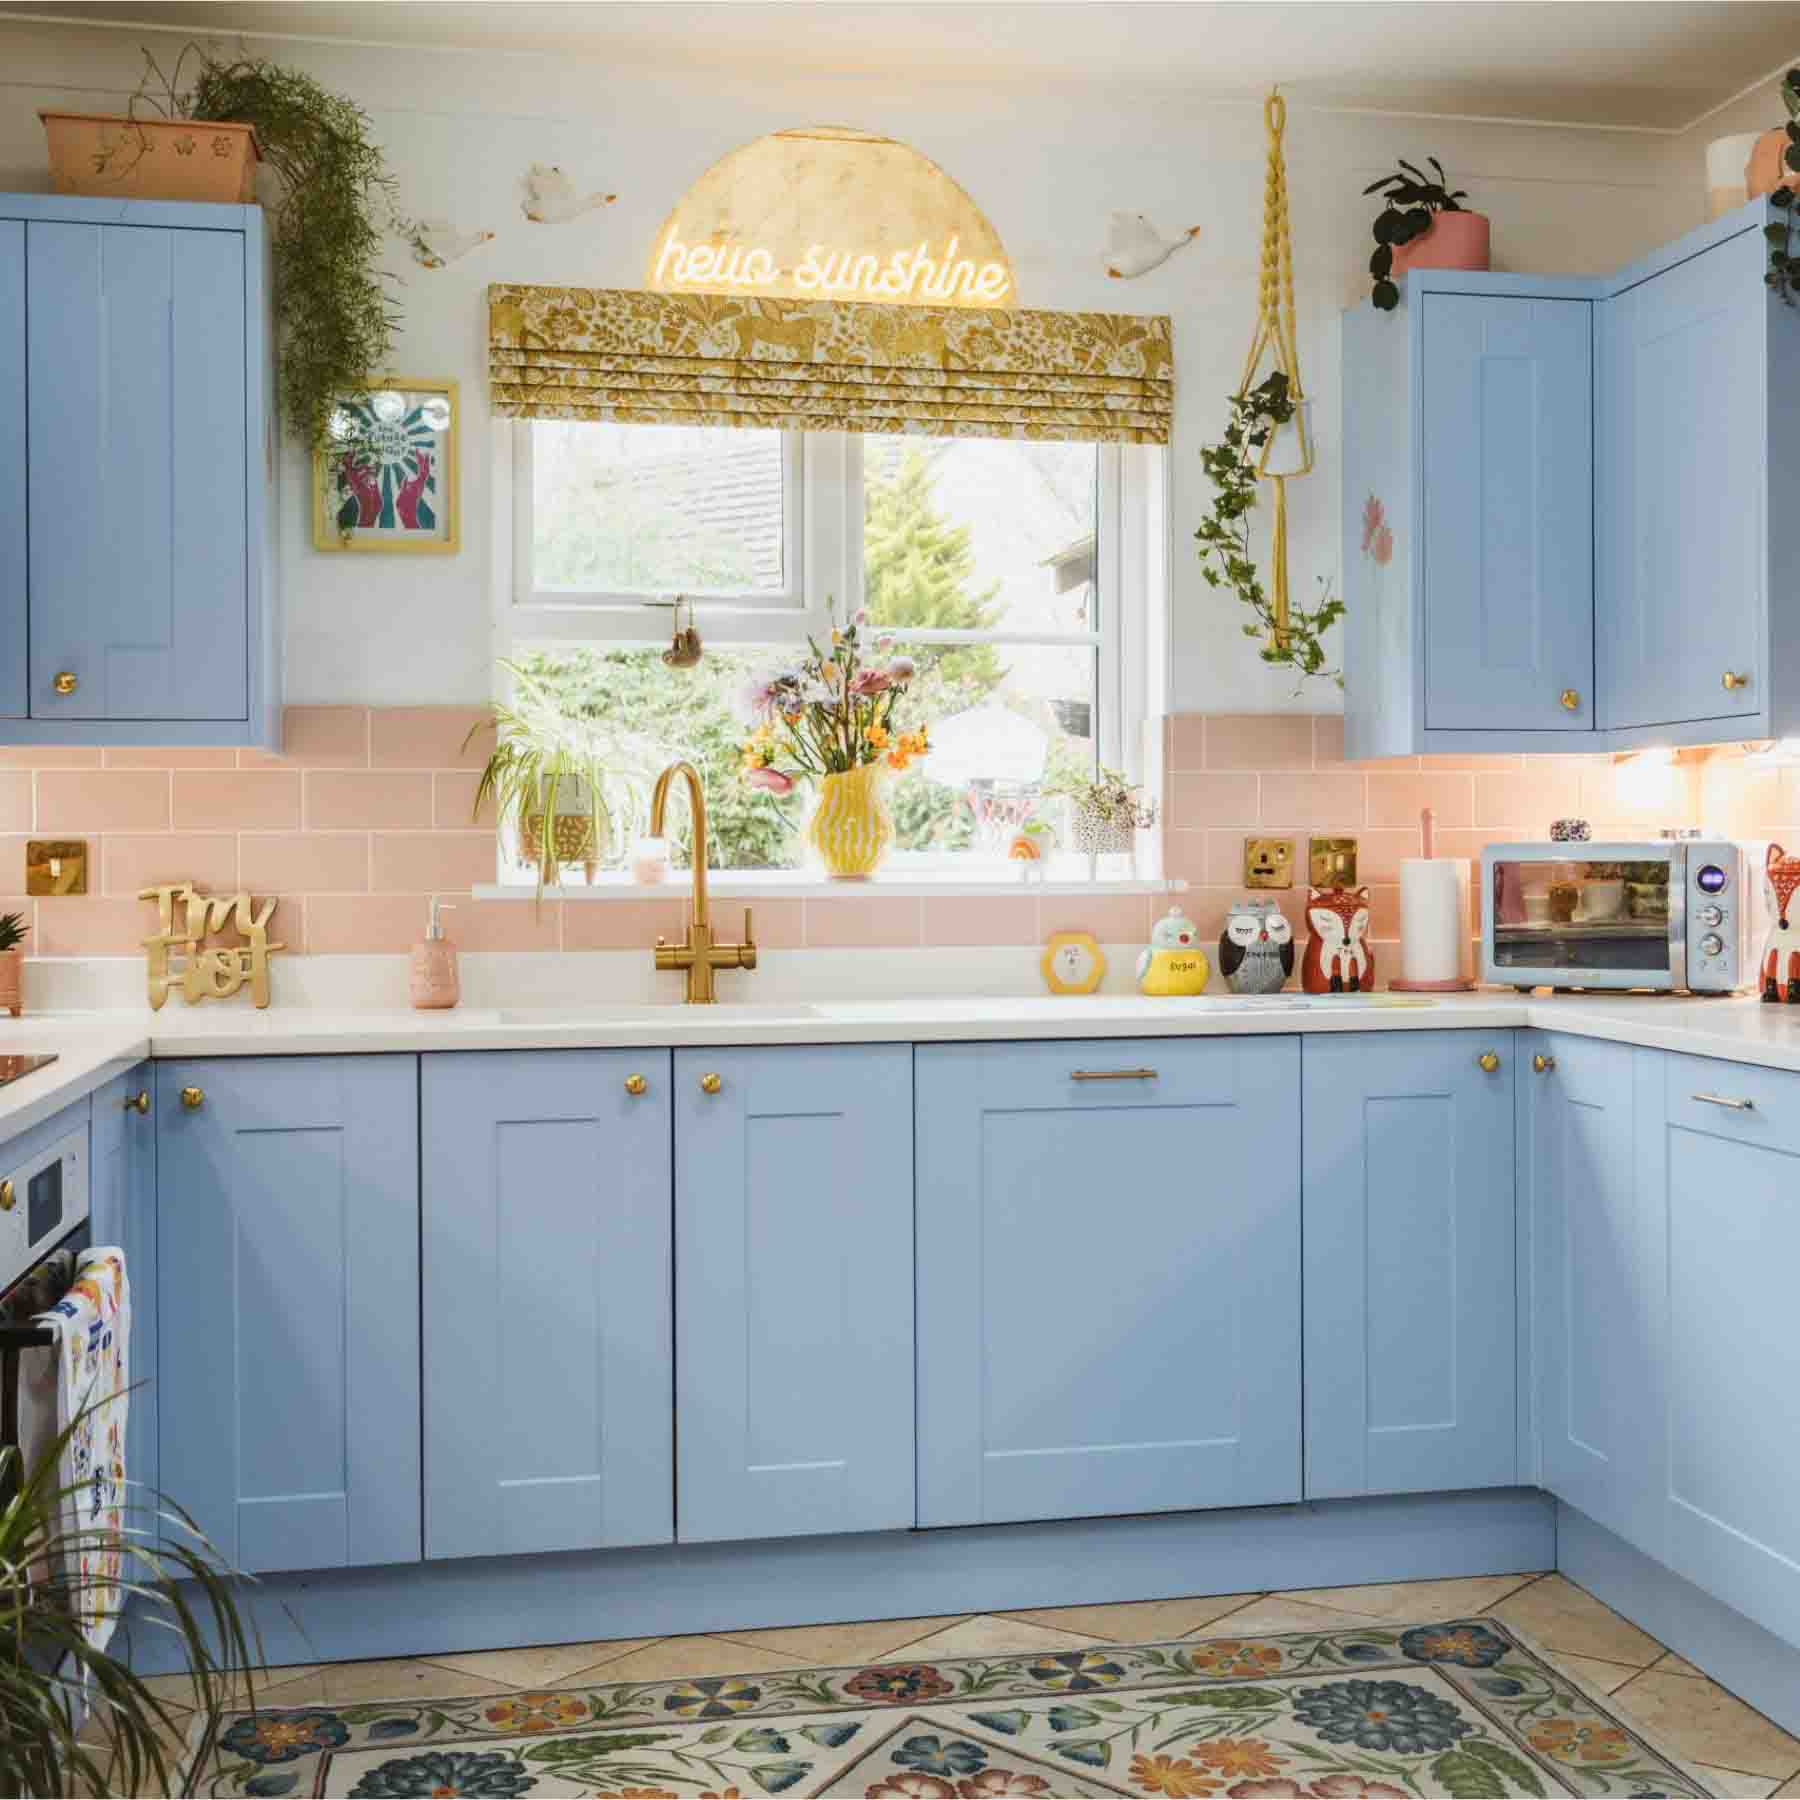 take full advantage of the natural lights to brighten your kitchen